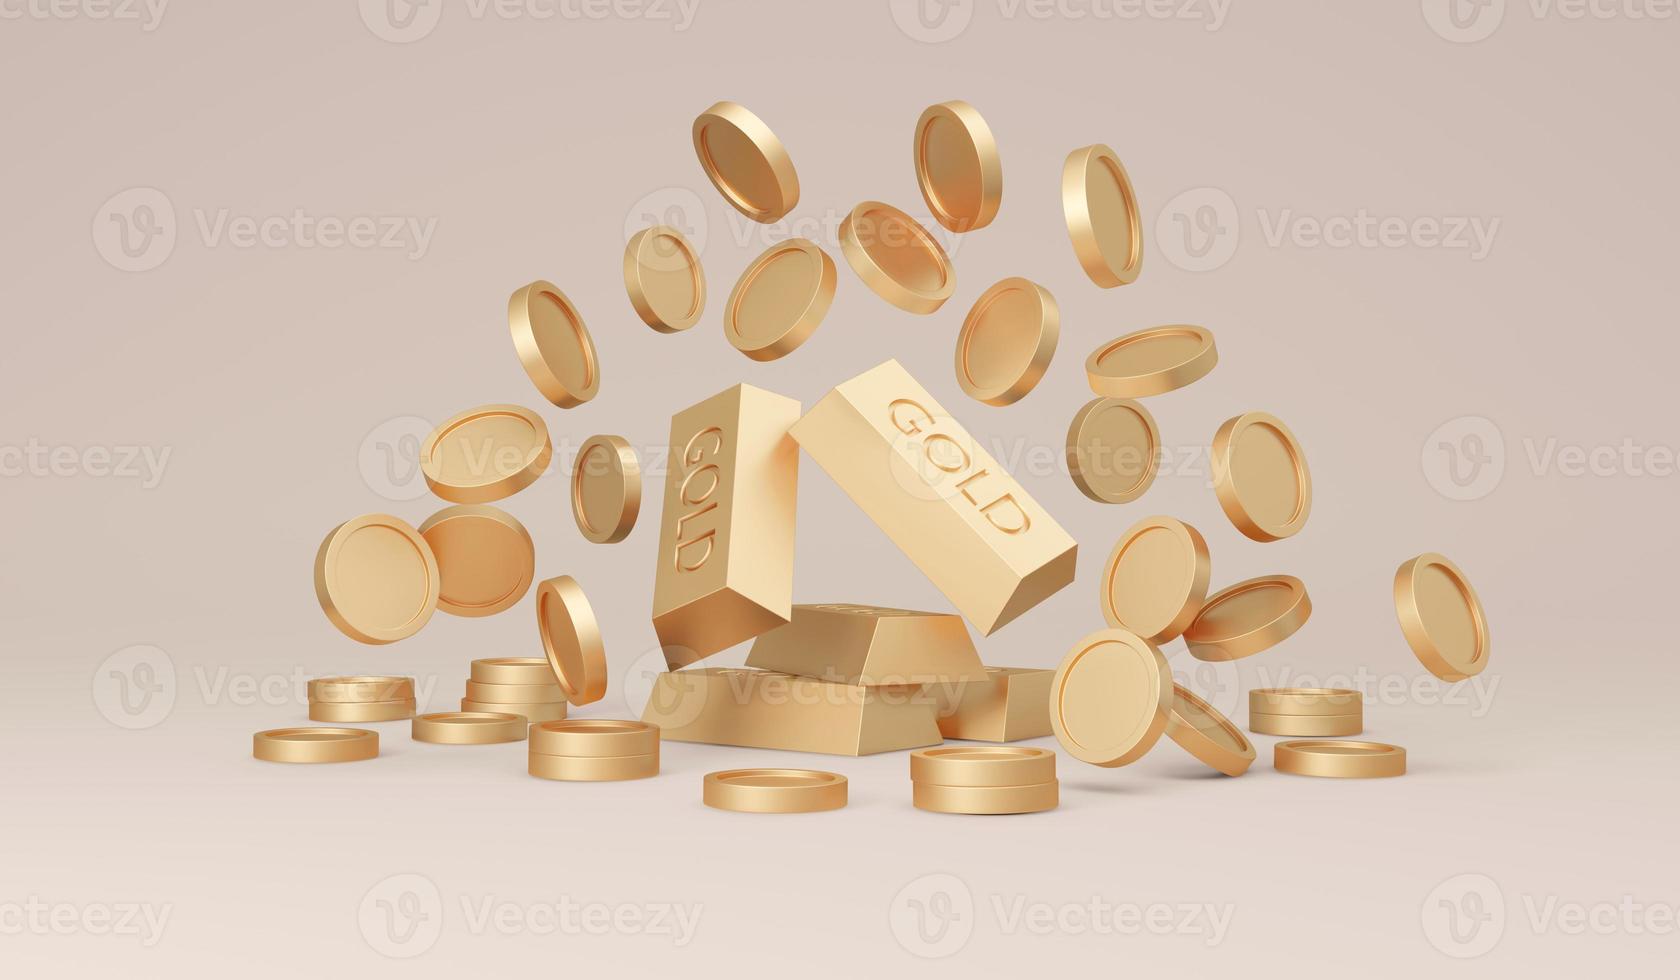 3D Rendering of money coins with gold bars on background concept of savings, investment, prosperity. 3D Render illustration. photo